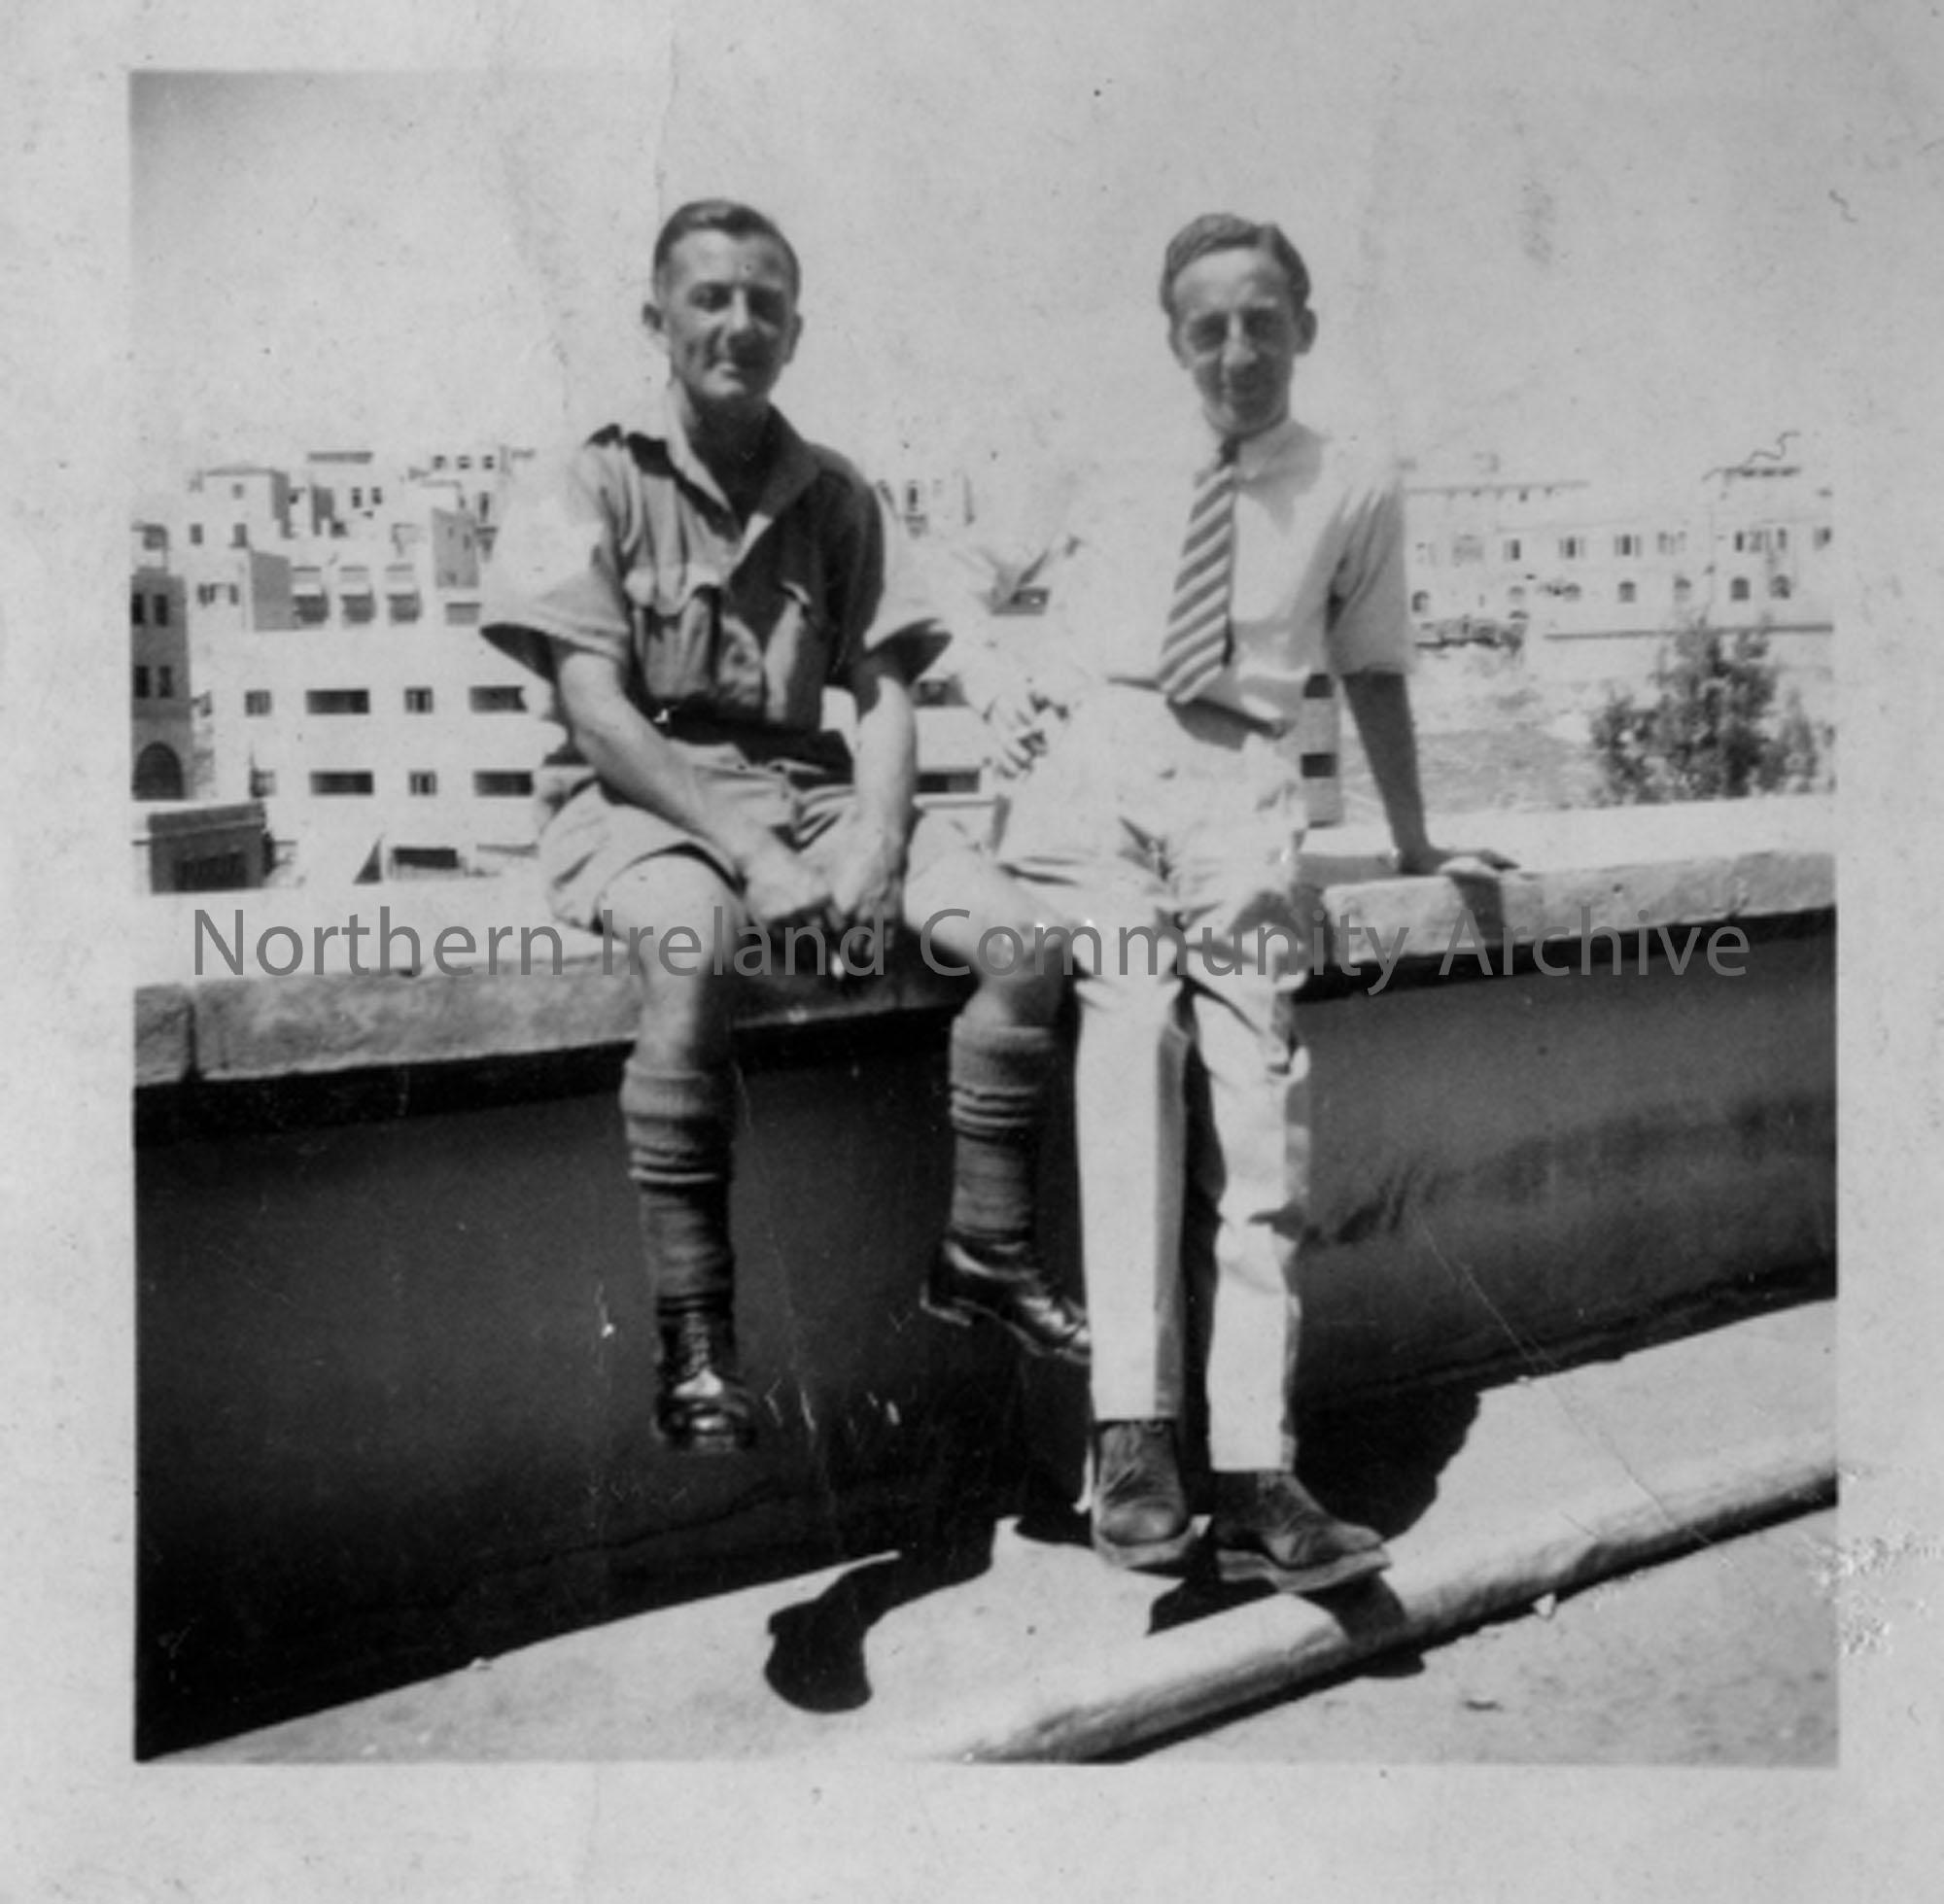 Sgt J Oliver with his brother-in-law who visited the Bty on Suez Canal